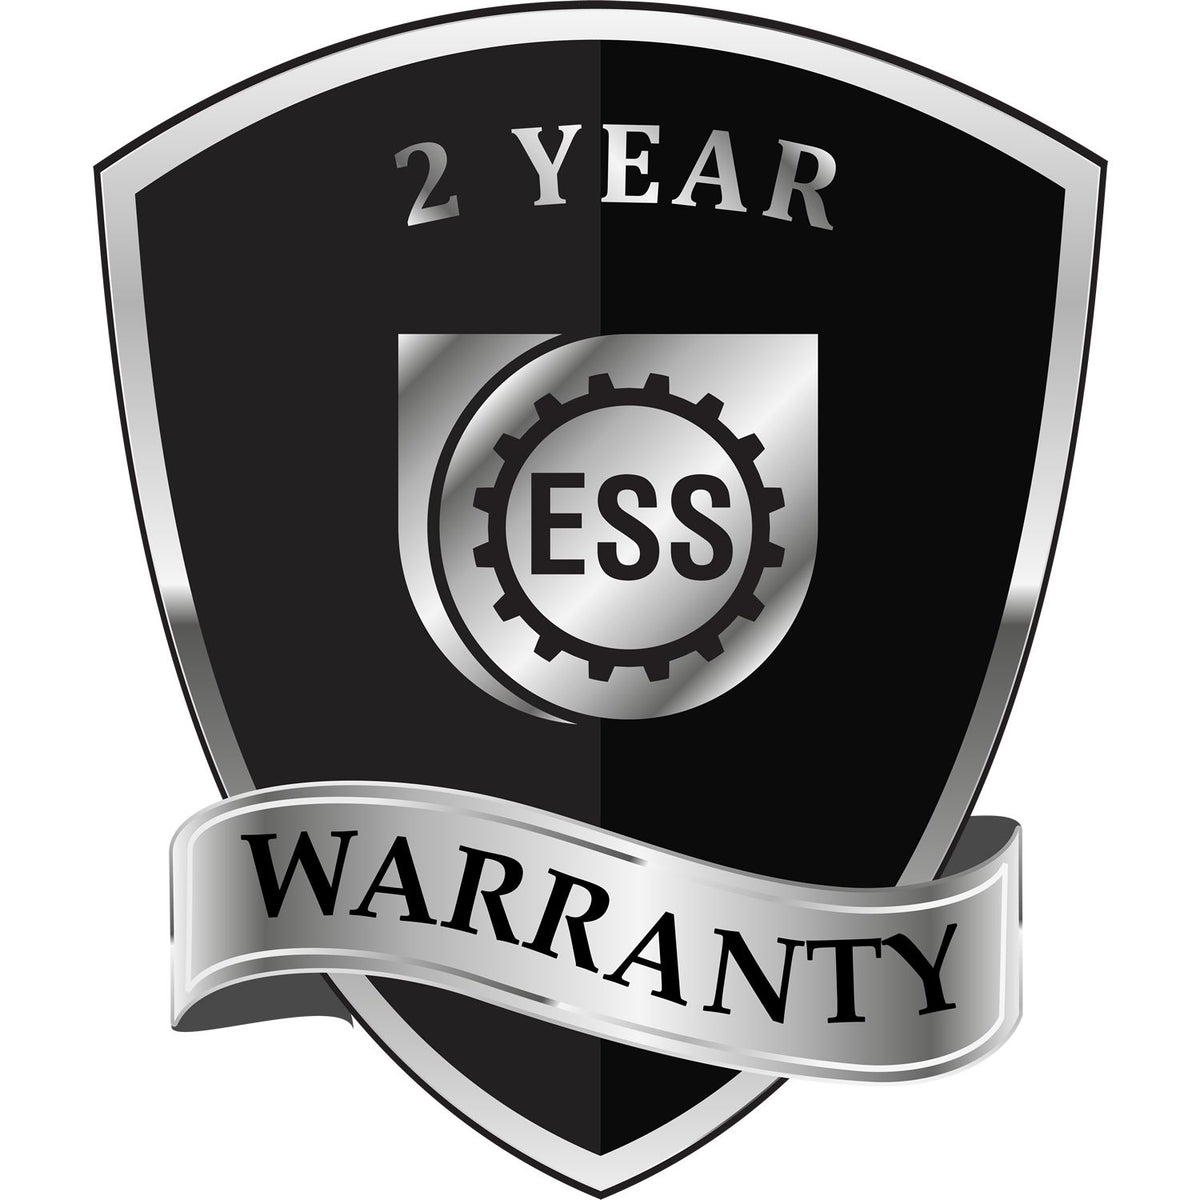 A black and silver badge or emblem showing warranty information for the Heavy Duty Cast Iron Tennessee Geologist Seal Embosser